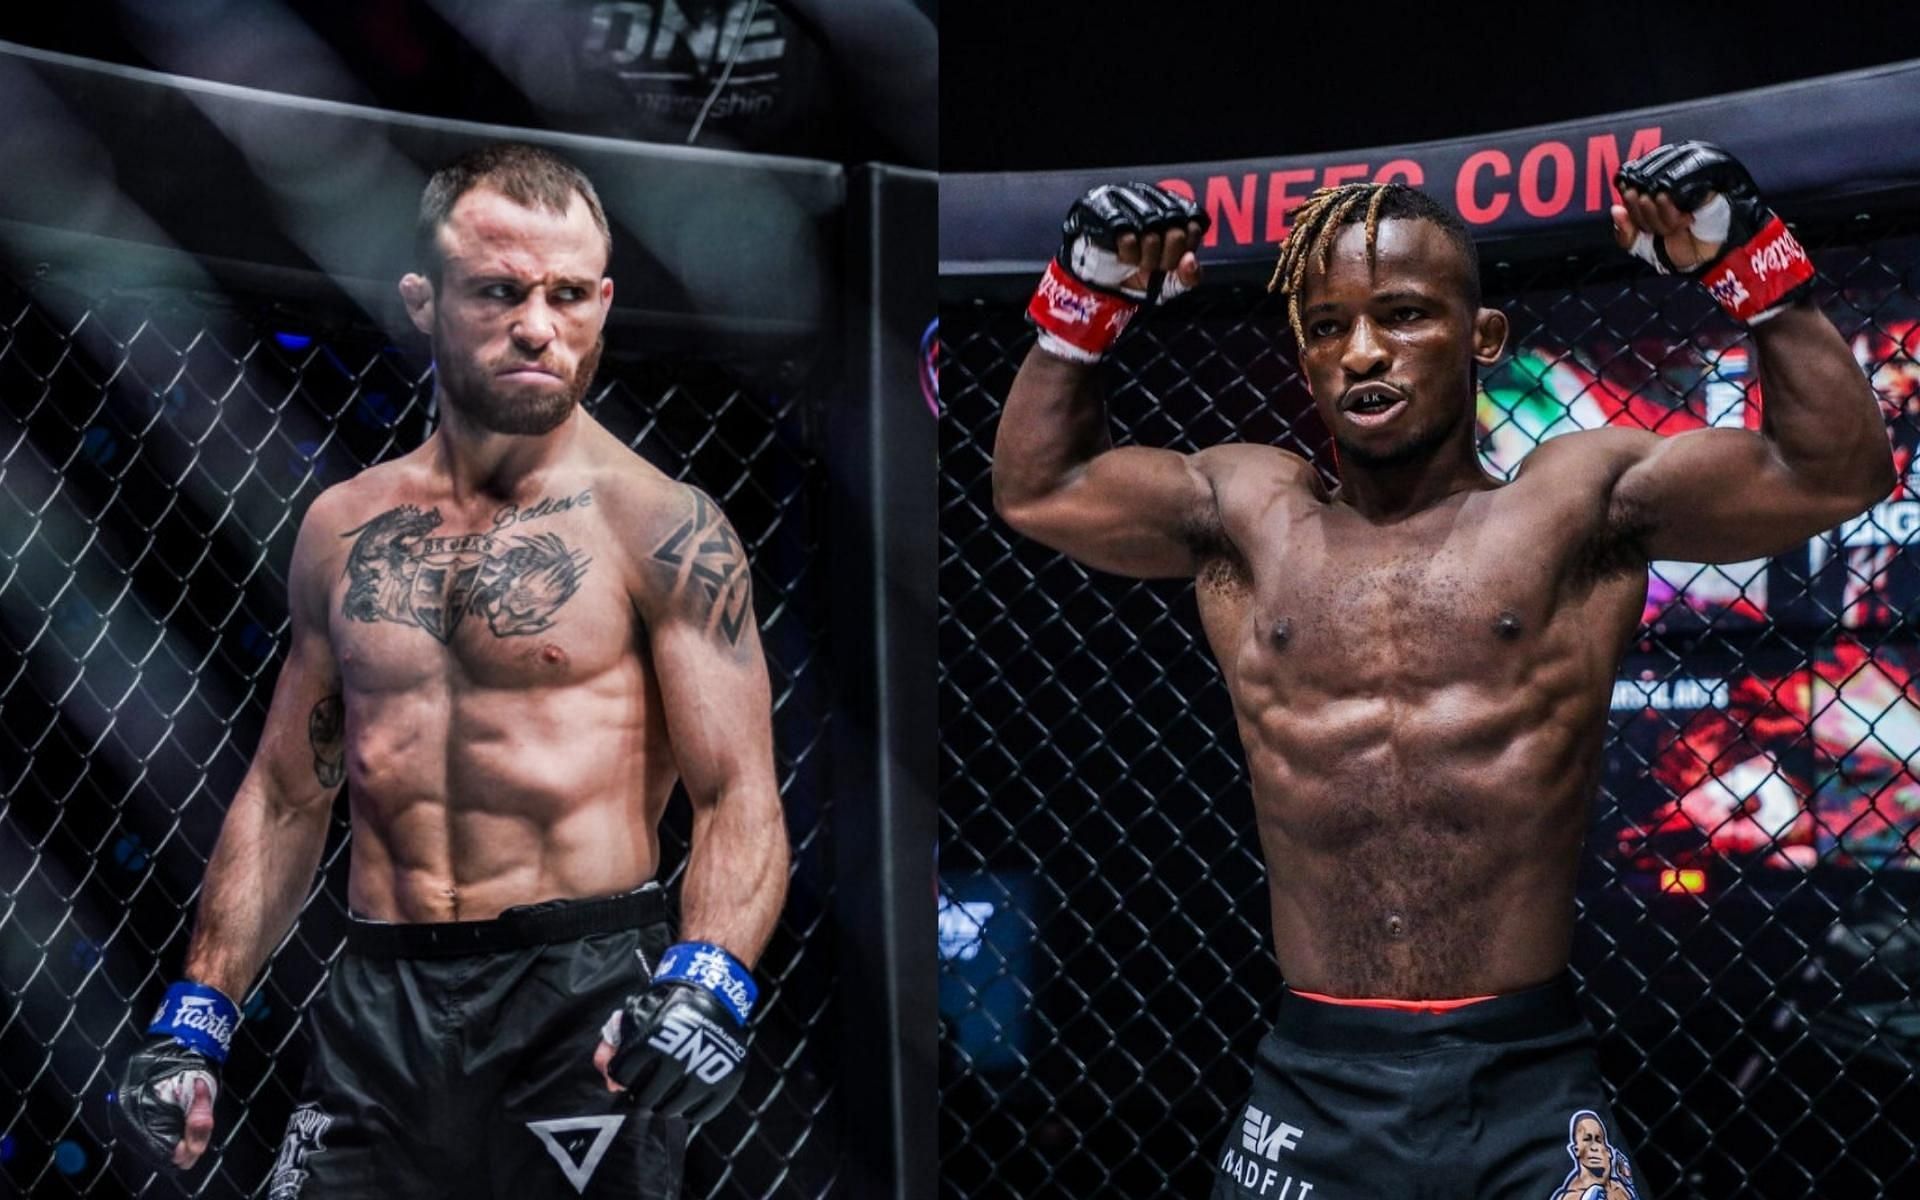 Jarred Brooks (left) will face Bokang Masunyane (right) on April 22nd at ONE: Eersel vs. Sadikovic. (Images courtesy of ONE Championship)